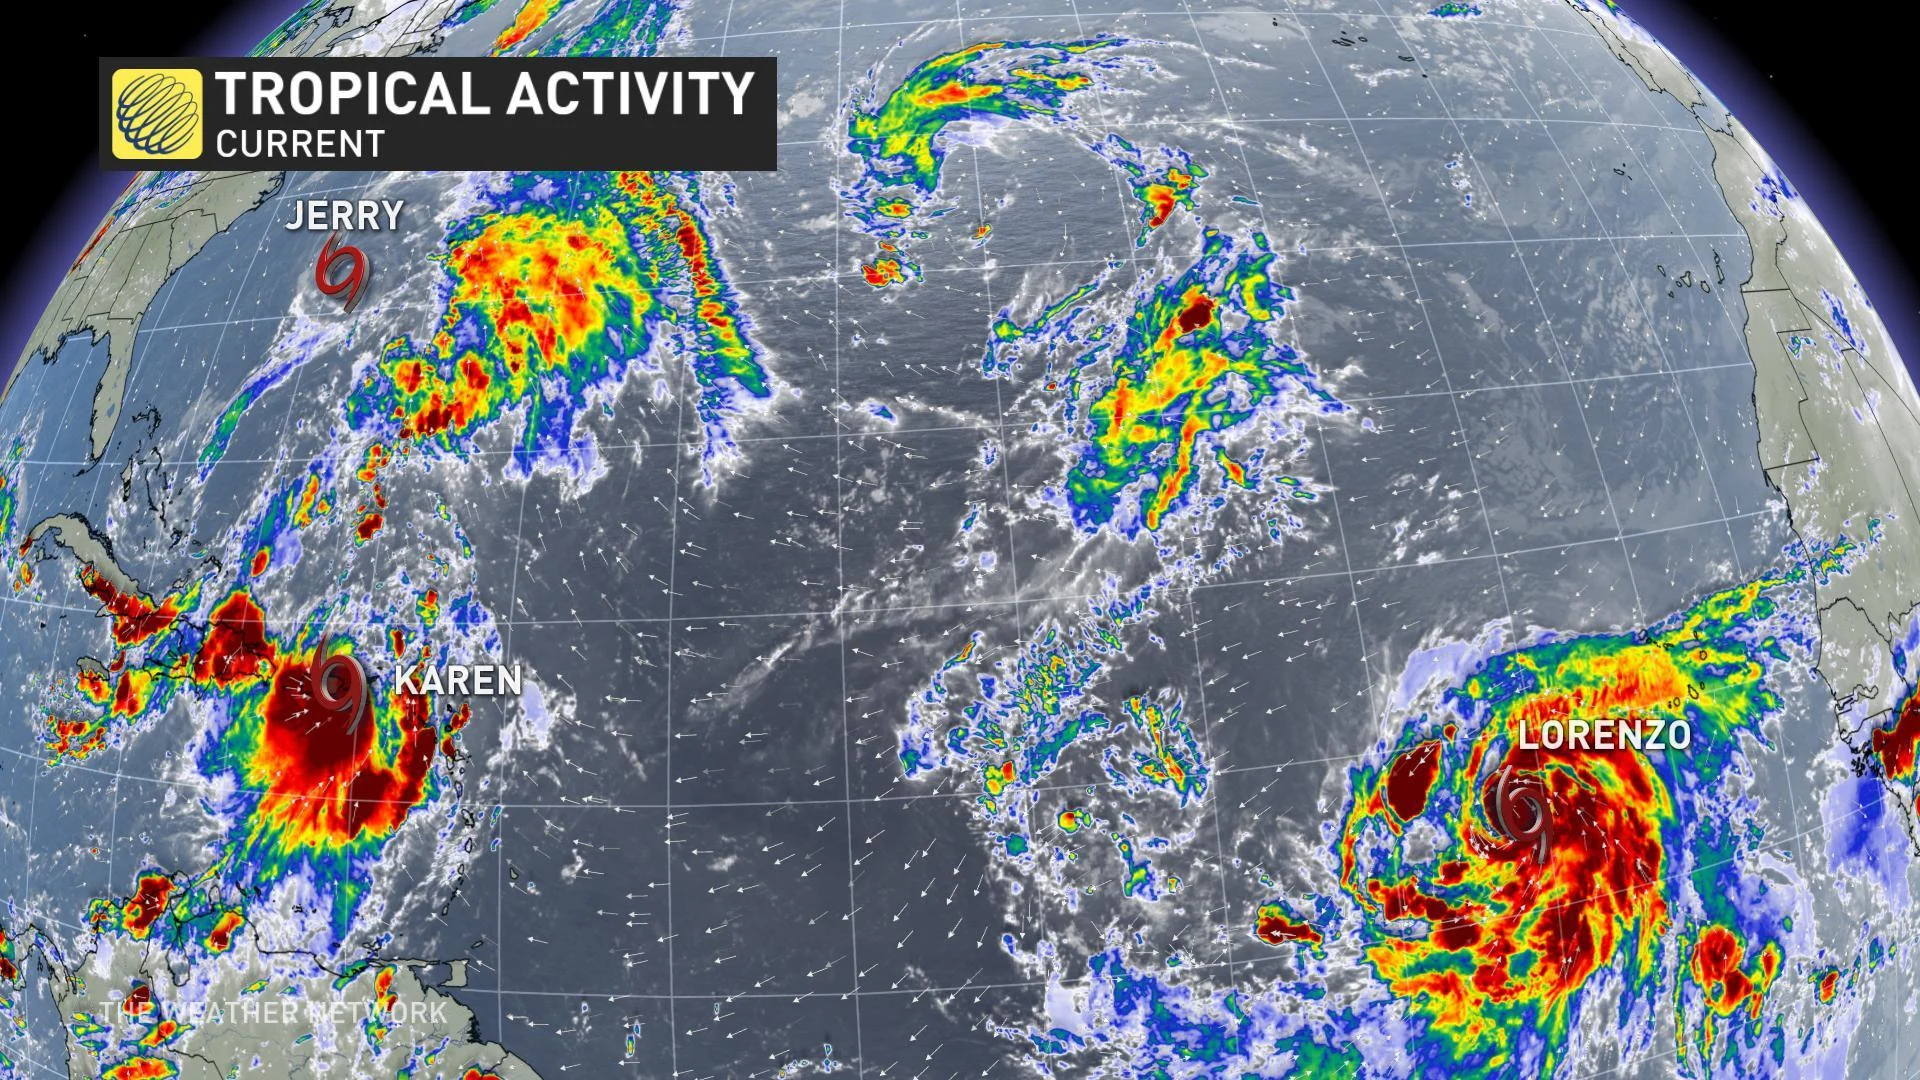 Three tropical cyclones continue to spin in the Atlantic